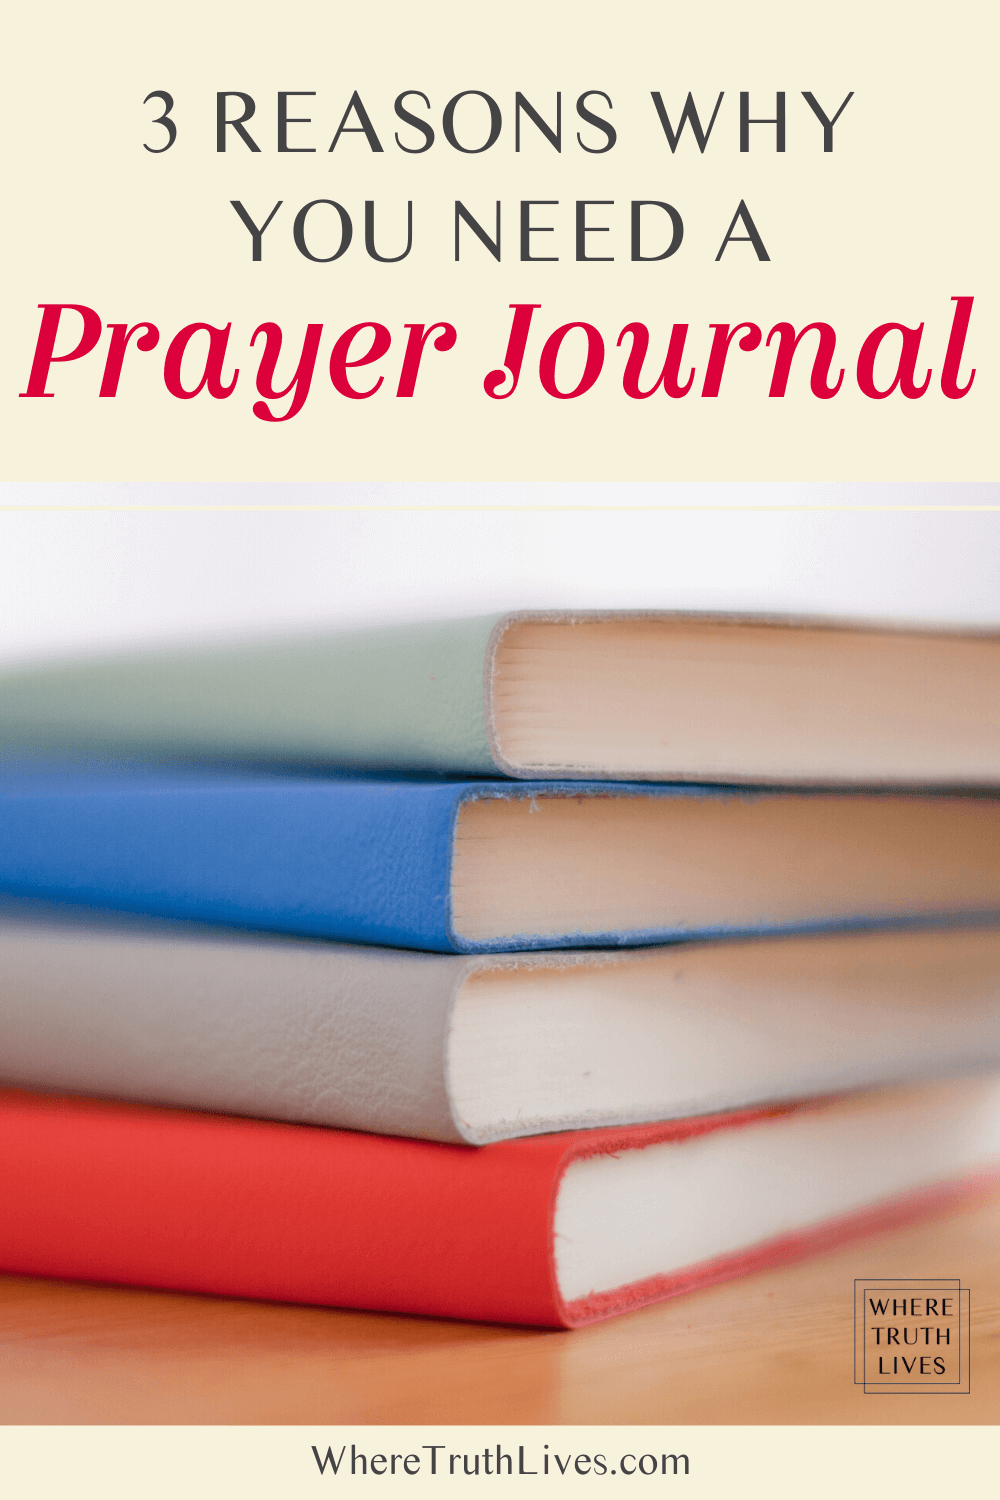 Do you struggle to pray regularly, deeply or thankfully? Writing your prayers is powerful. Here are 3 reasons why you really need a prayer journal... | Where Truth Lives .com | Christian blog, free printable, prayer journaling, pray